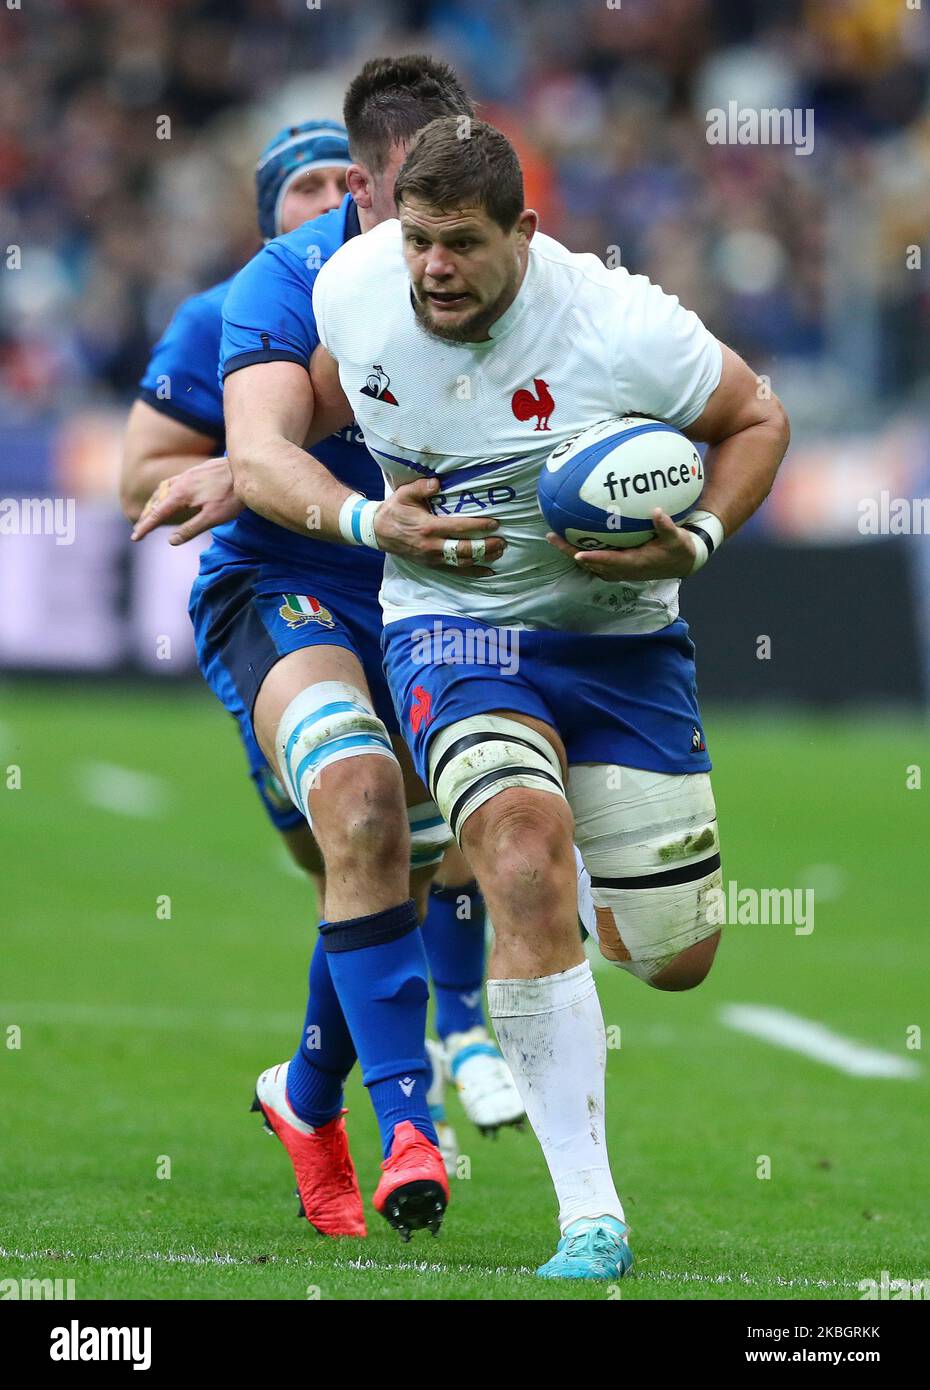 Paul Willemse of France in action during the rugby Guinness 6 Nations match  France v Italy at the Stade de France in Paris, France on February 9, 2020  (Photo by Matteo Ciambelli/NurPhoto